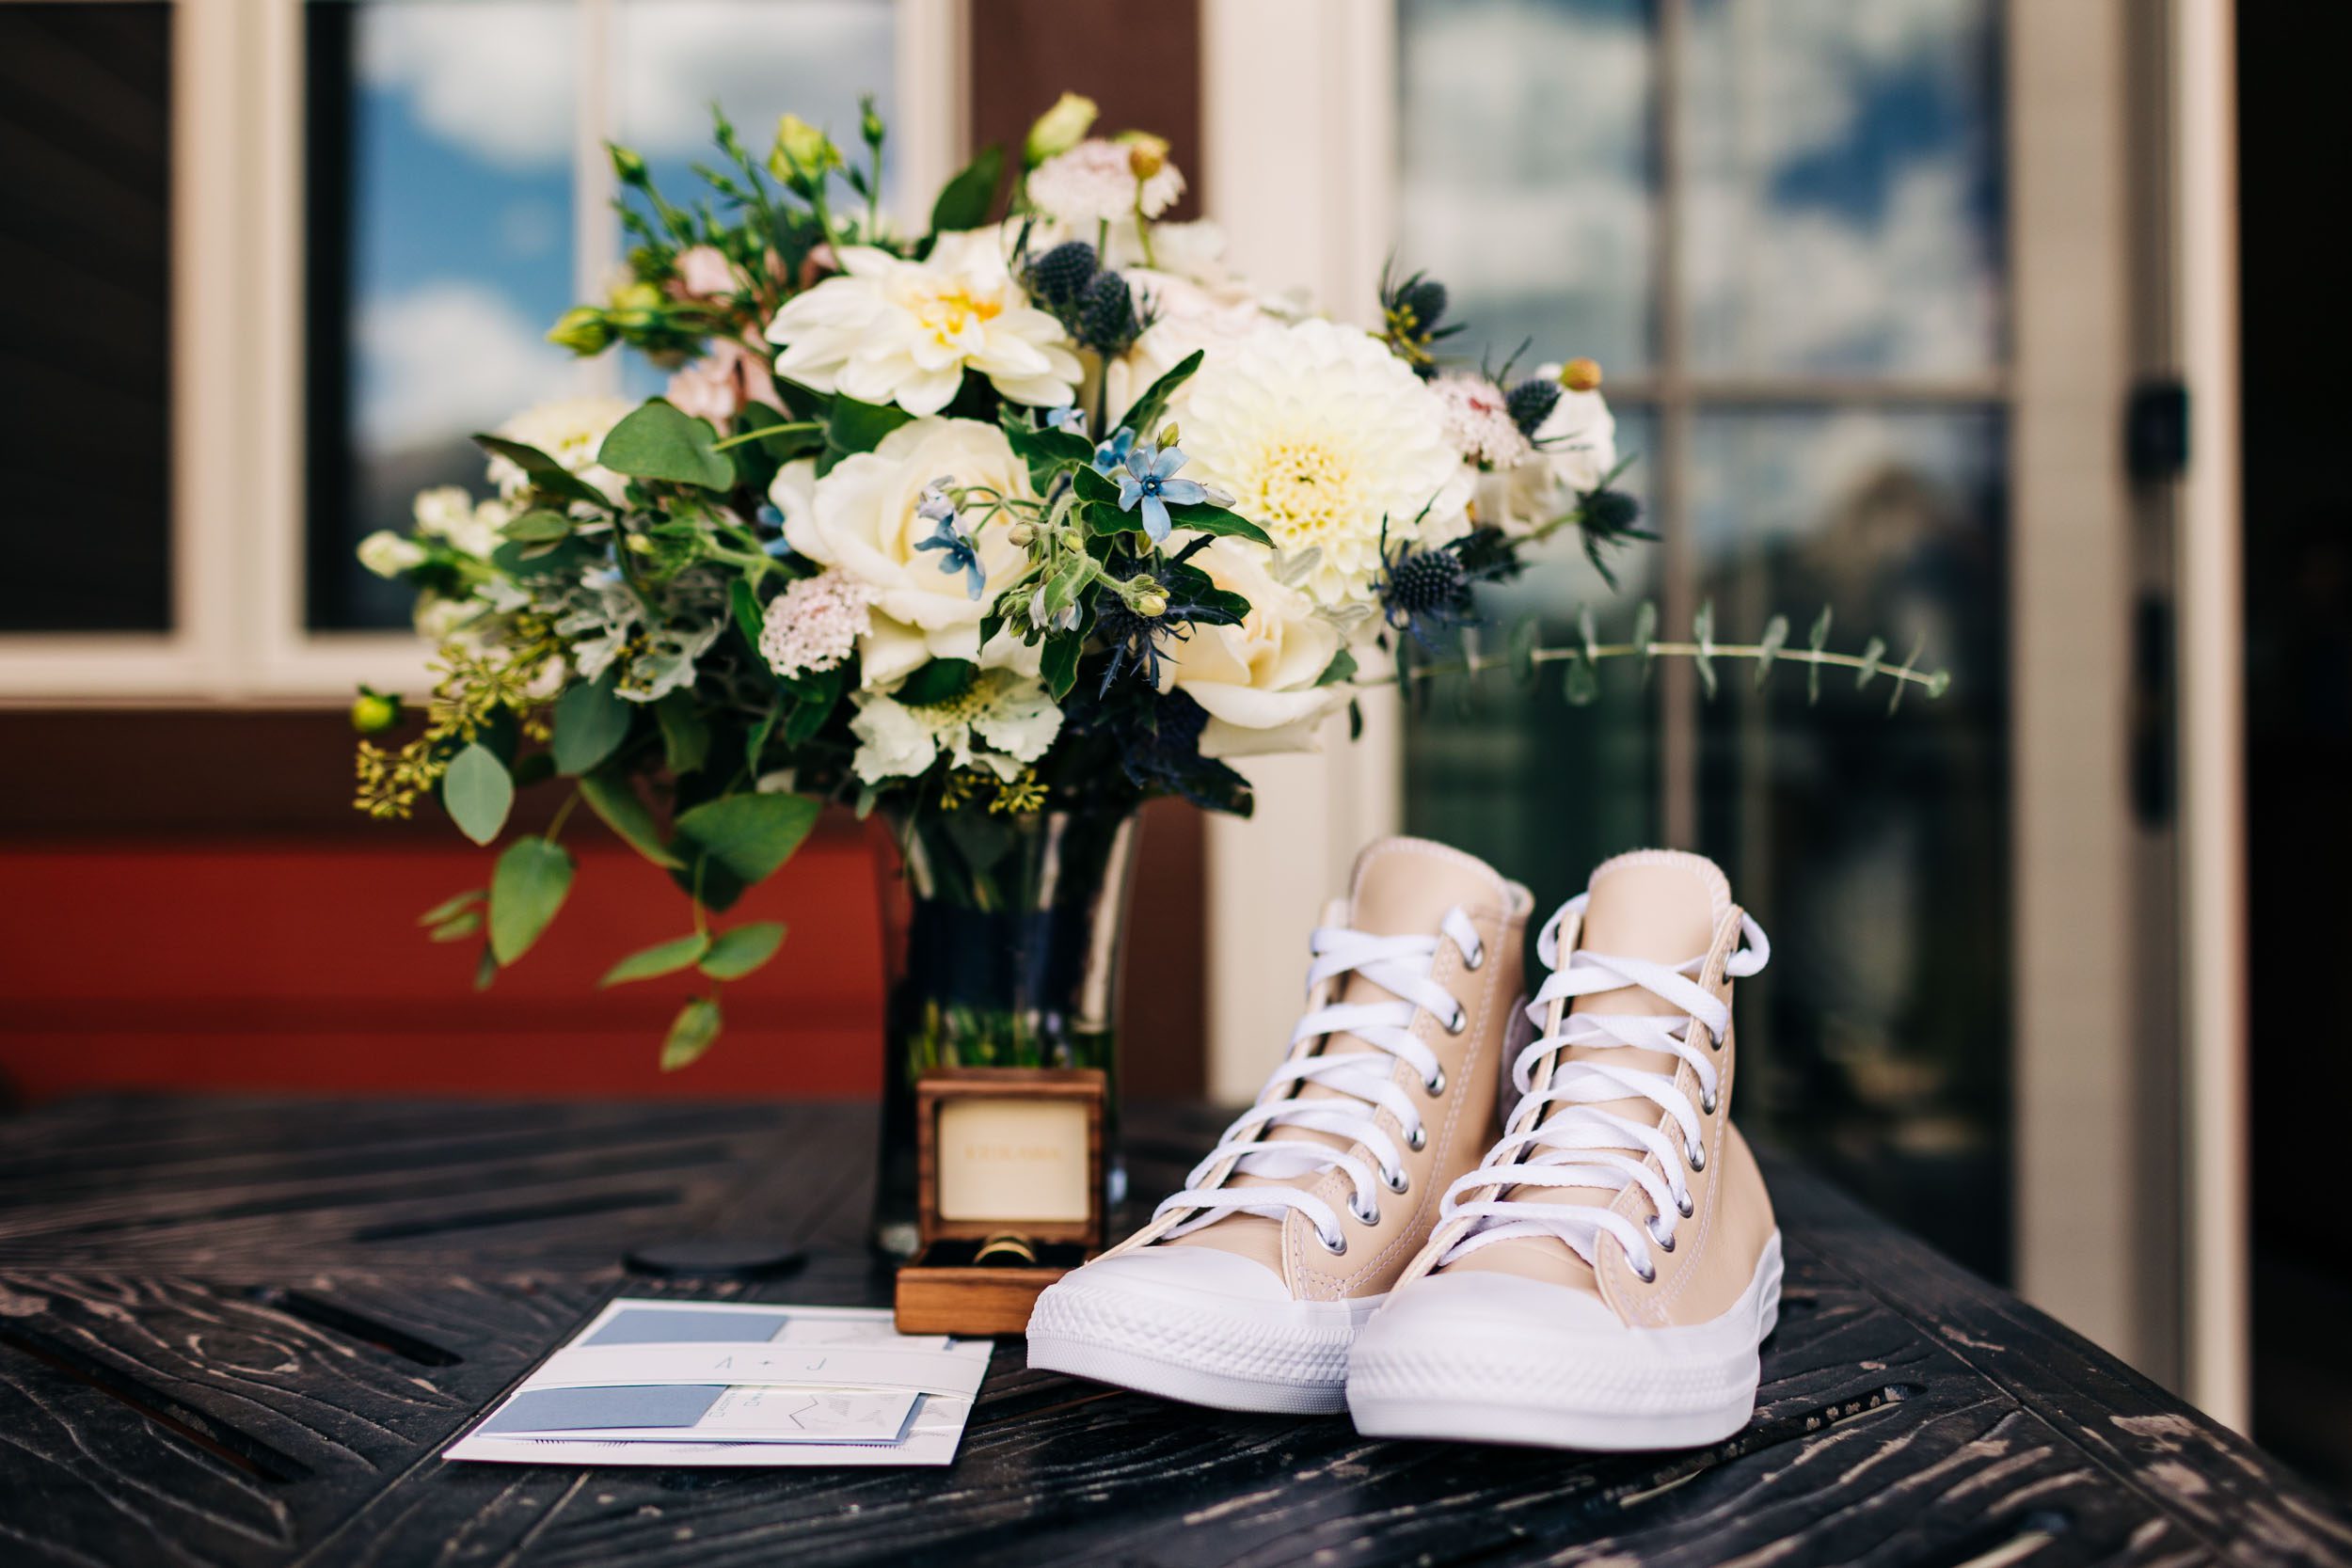 Wedding details of converse shoes and flowers